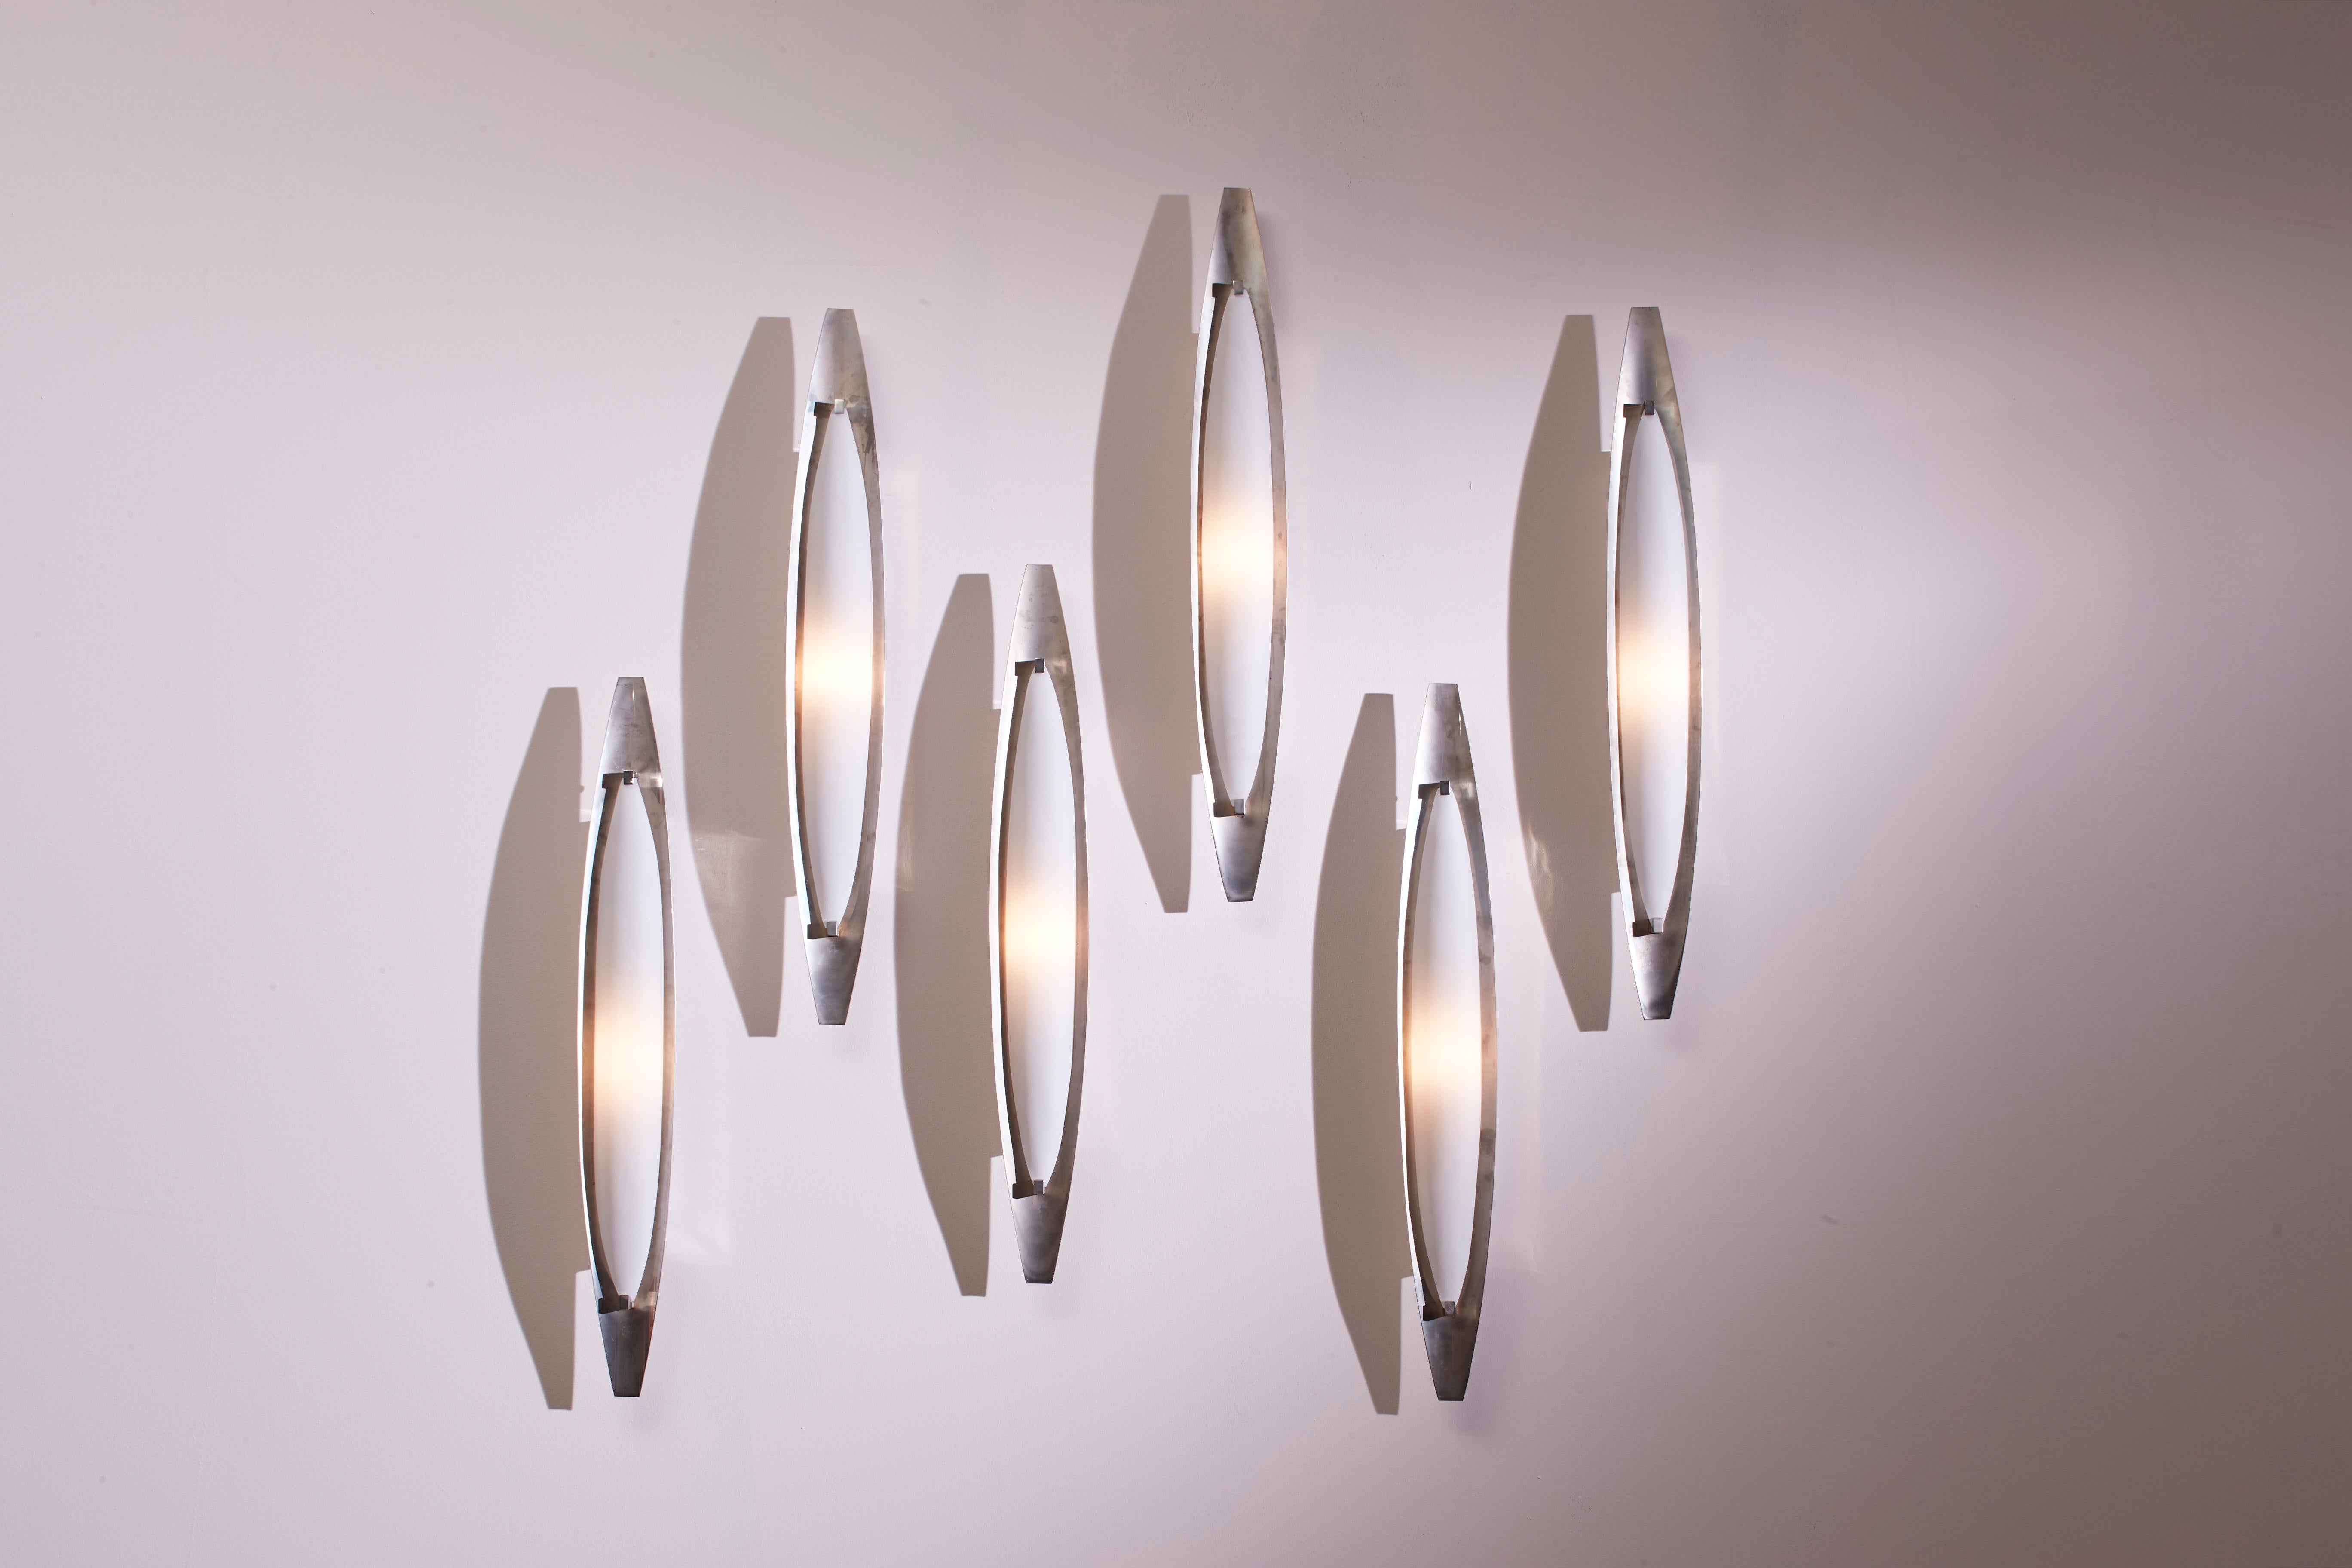 A set consisting of six wall lamps, model 2254, in brushed nickel-plated brass with satin white glass diffusers, produced by Fontana Arte, Italy, circa 1960.

Made of brushed nickel-plated brass, these lamps feature curved satin glass diffusers.